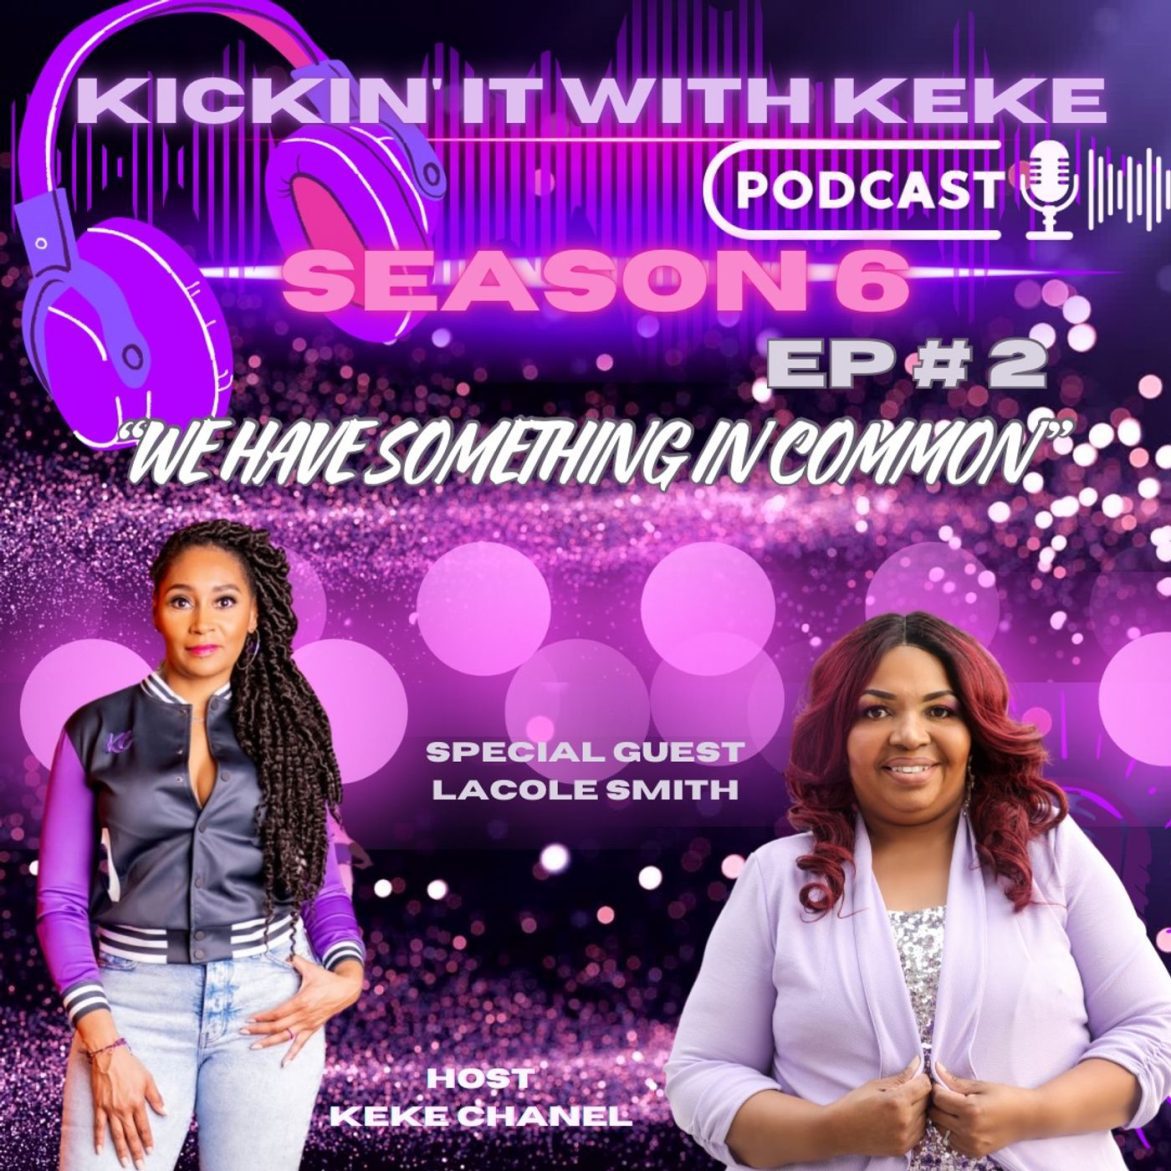 Black Podcasting - Season 6: Episode #2 "We Have Something In Common"